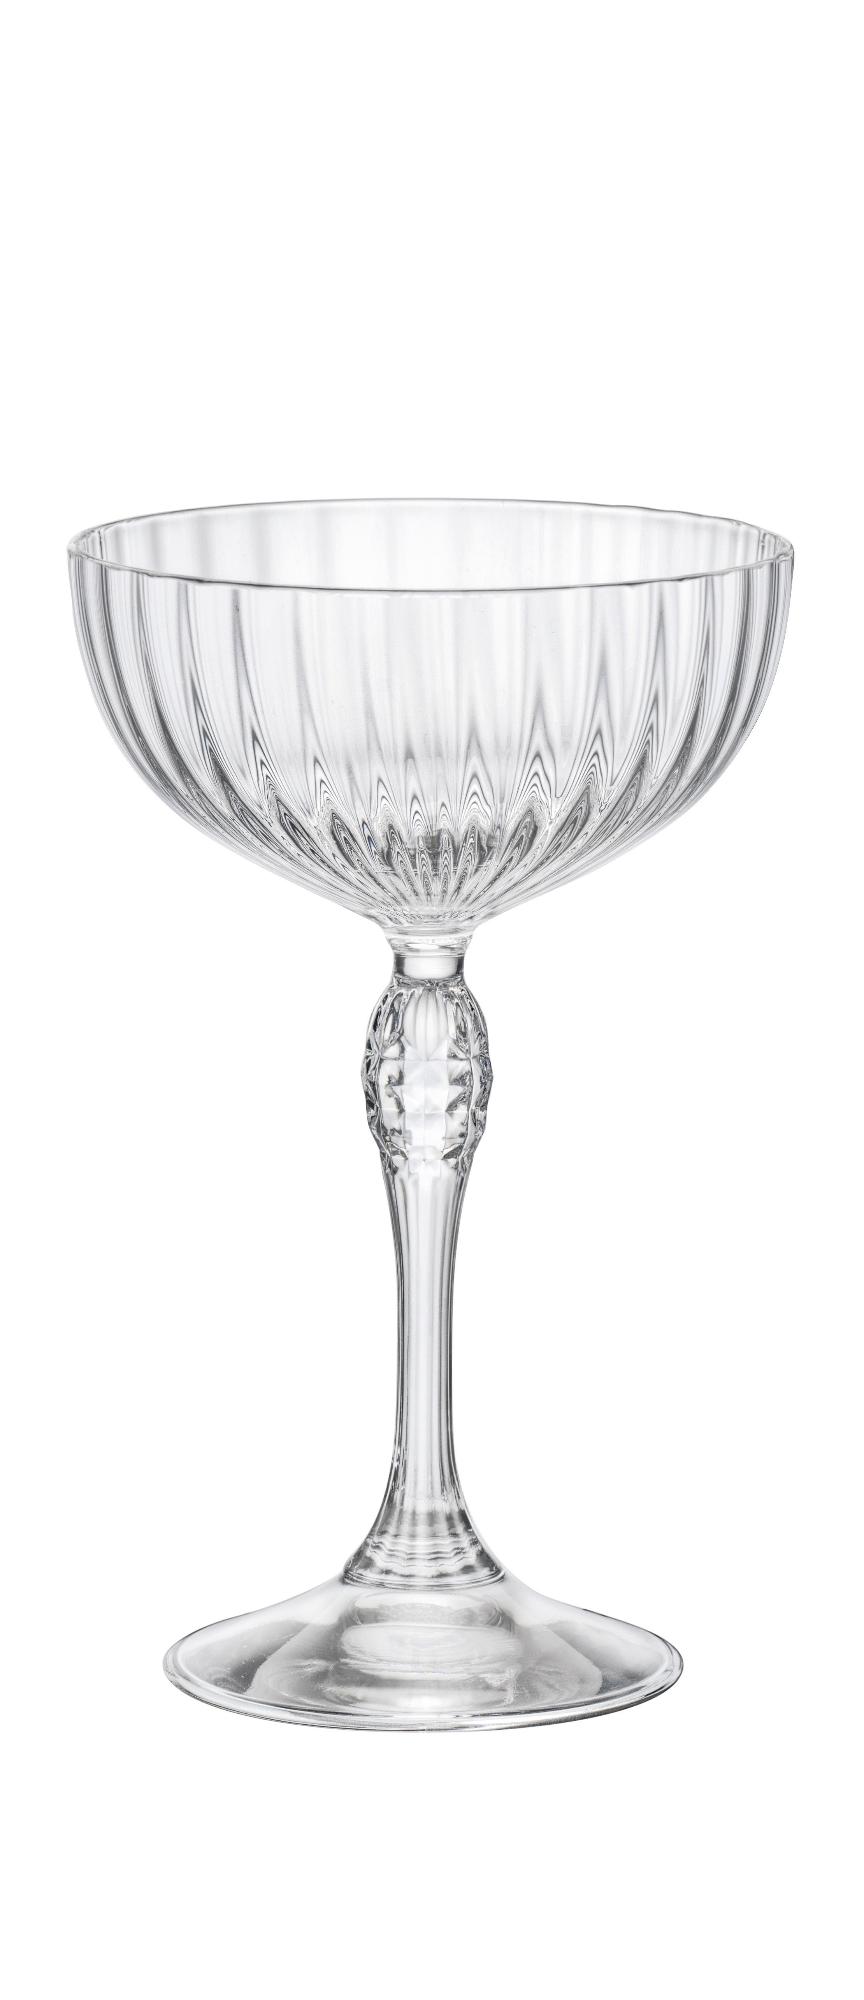 America'20s cocktail coupe glass, 220ml